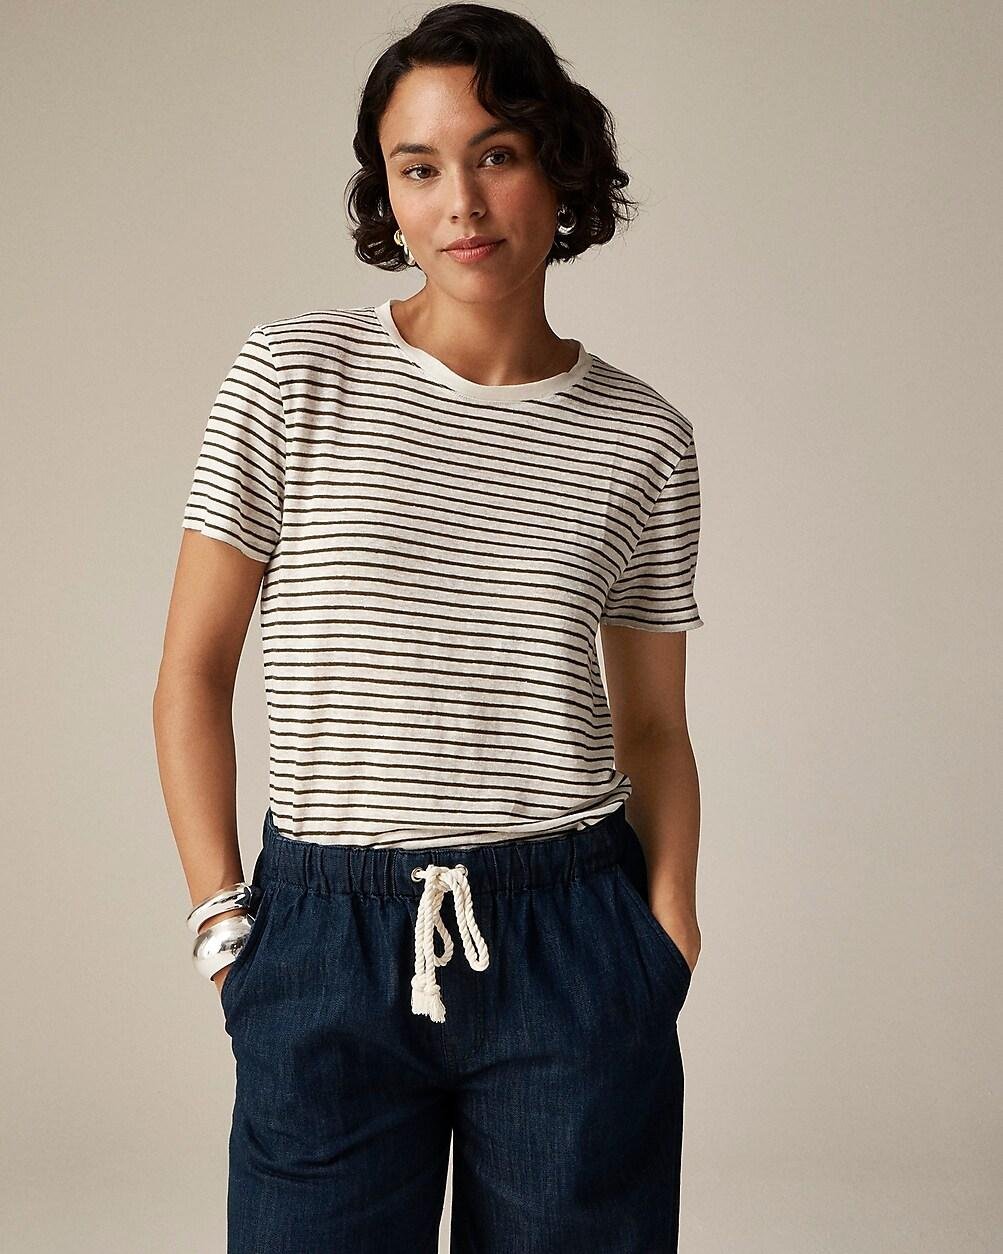 Relaxed linen T-shirt in stripe by J.CREW